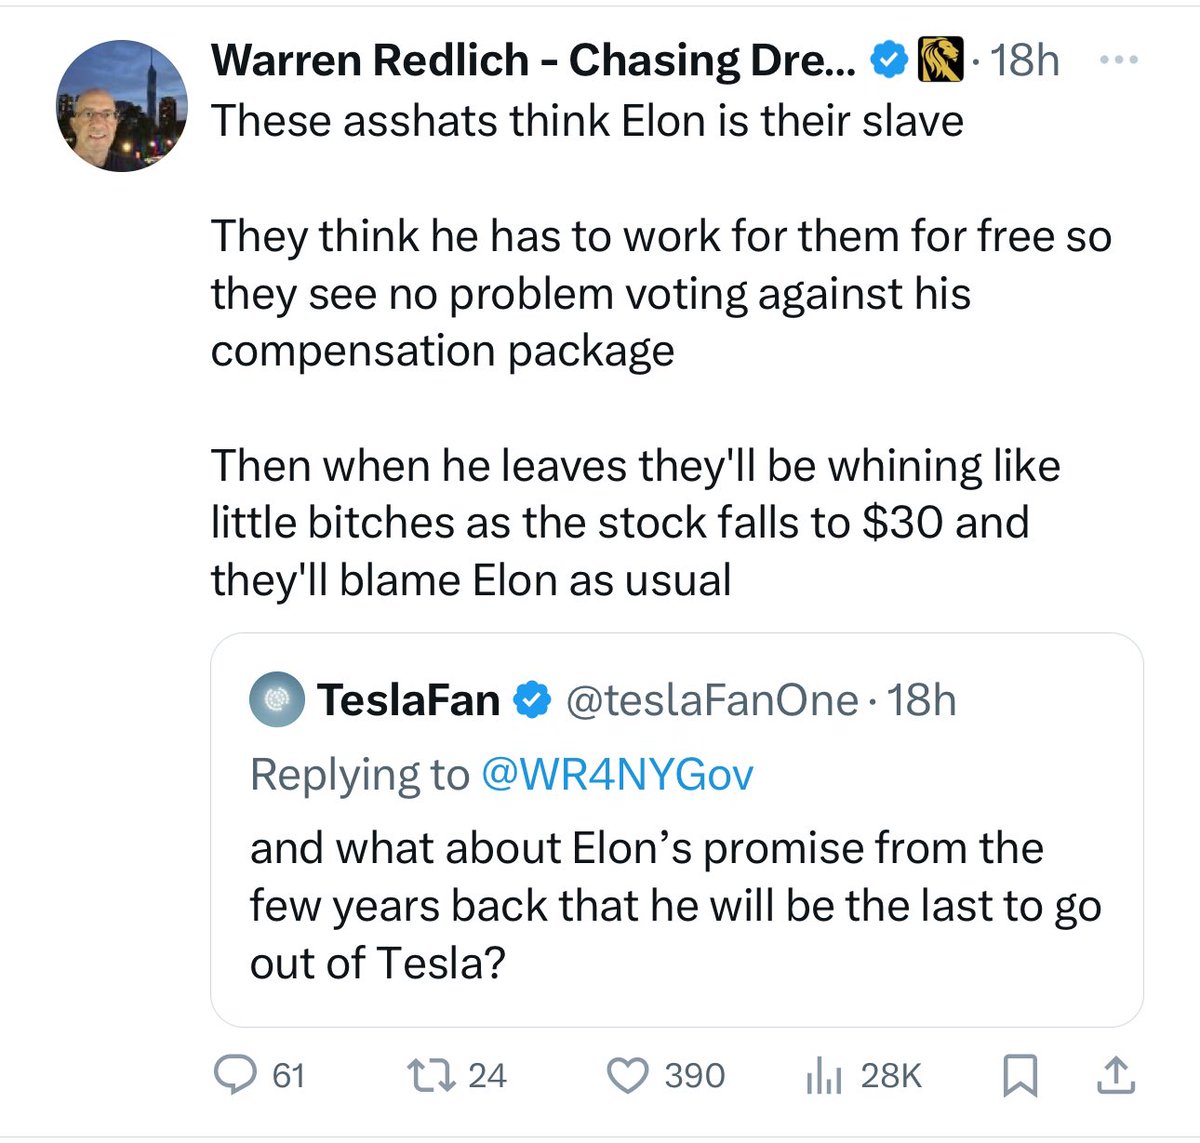 So he admits $TSLA operational business is worth 30$ and the ‚Musk bonus‘ is 140-150$ per share? That would indeed justify the shareholder blackmailing campaign (against the ‚whining bitches‘) to keep Musk! Unbelievable you get this level of entertainment for free here.